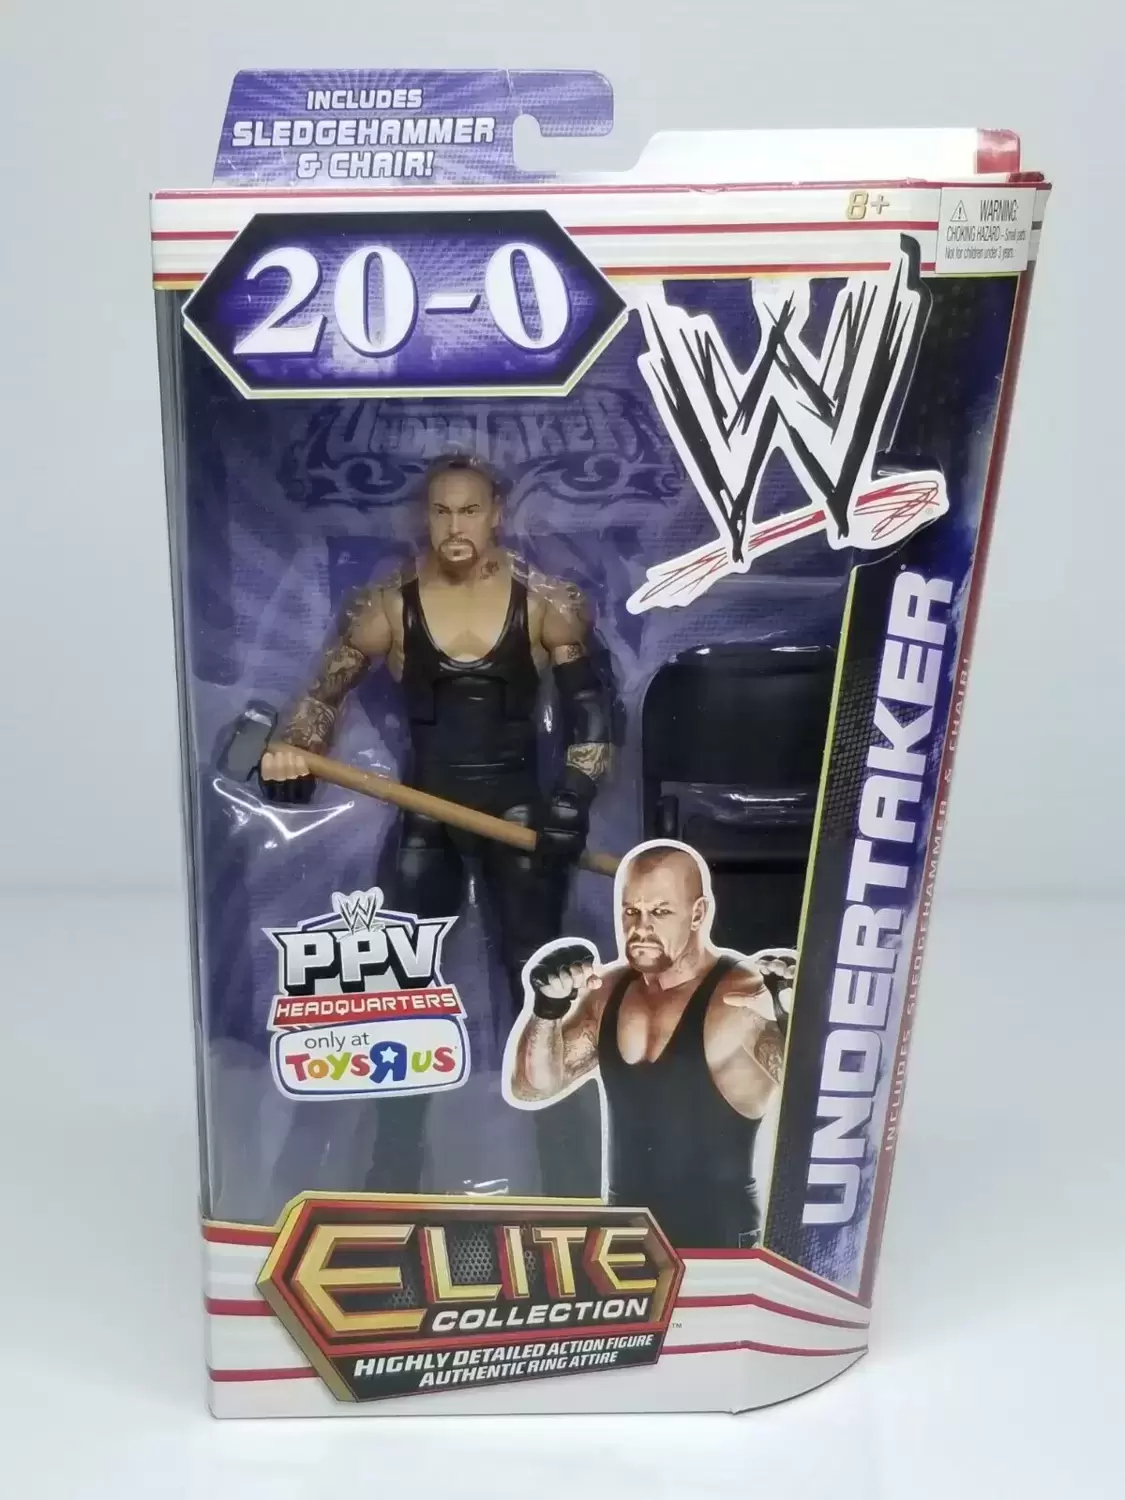 WWE Elite Collection - Undertaker 20-0 PPV Headquarters